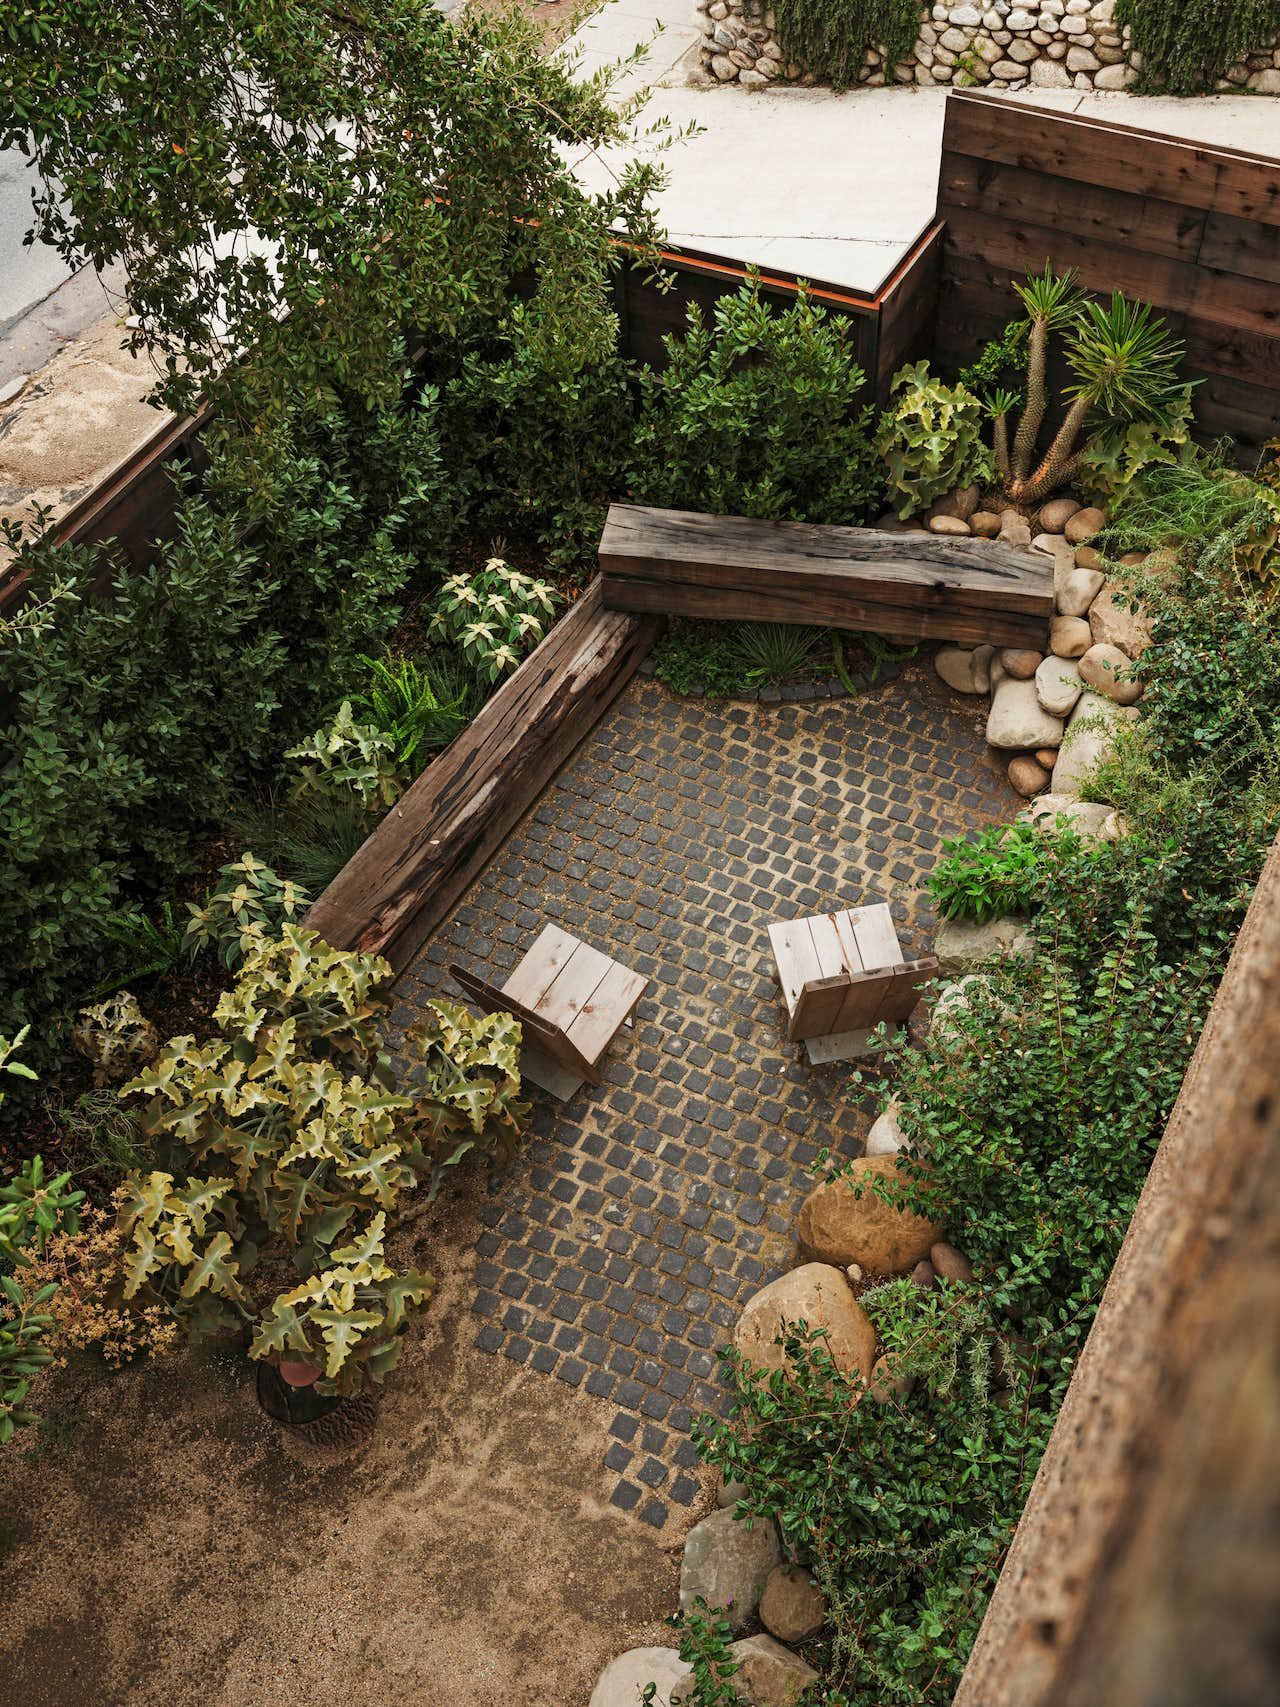 Creating Intimate Outdoor Spaces: Small Garden Design Tips to Transform Your Yard